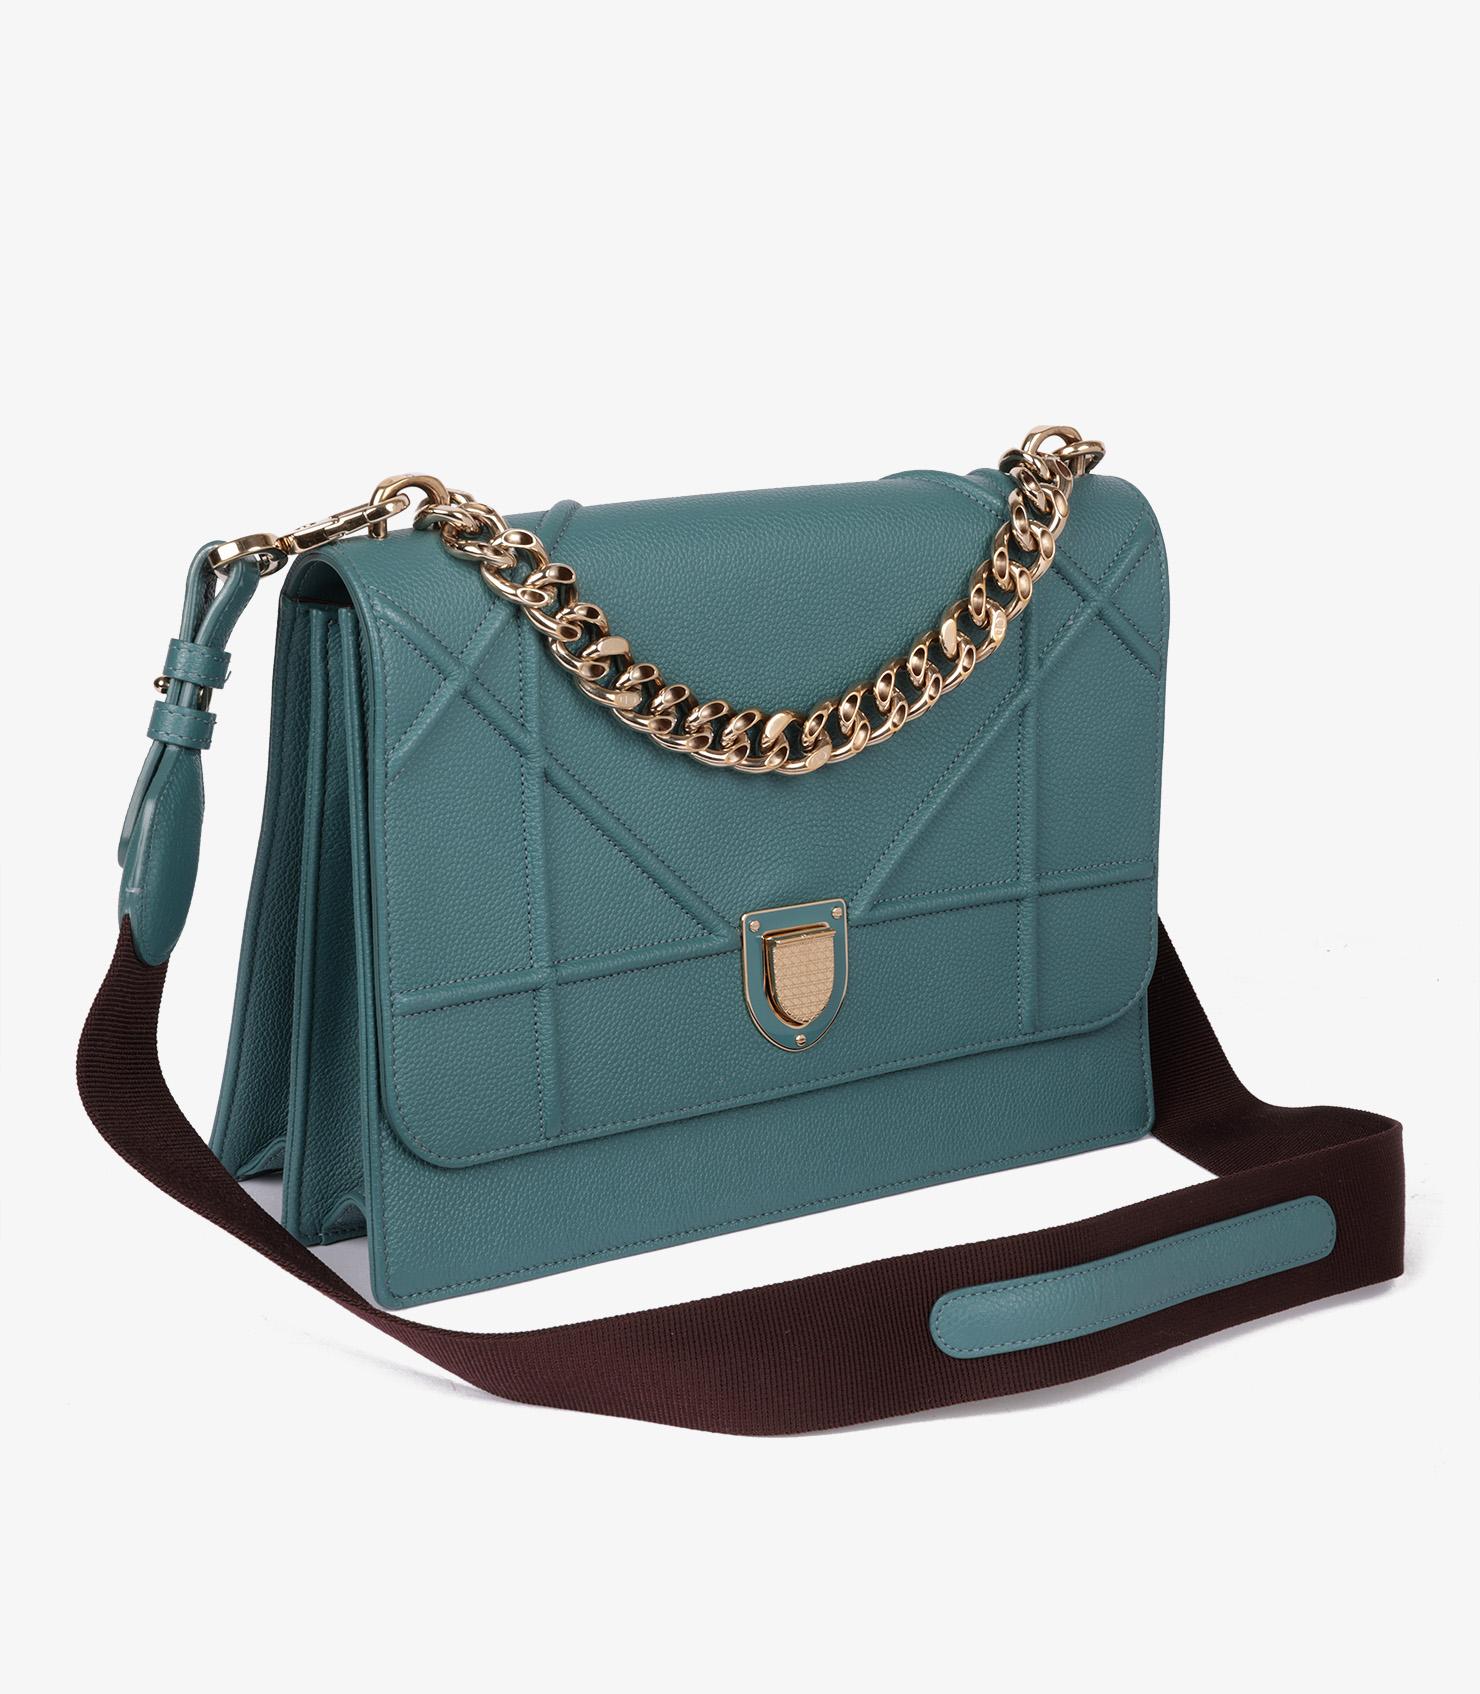 Christian Dior Blue Grained Calfskin Leather Medium Diorama

Brand- Christian Dior
Model- Medium Diorama
Product Type- Crossbody, Shoulder, Top Handle
Serial Number- 09********
Age- Circa 2016
Accompanied By- Christian Dior Care Booklet,